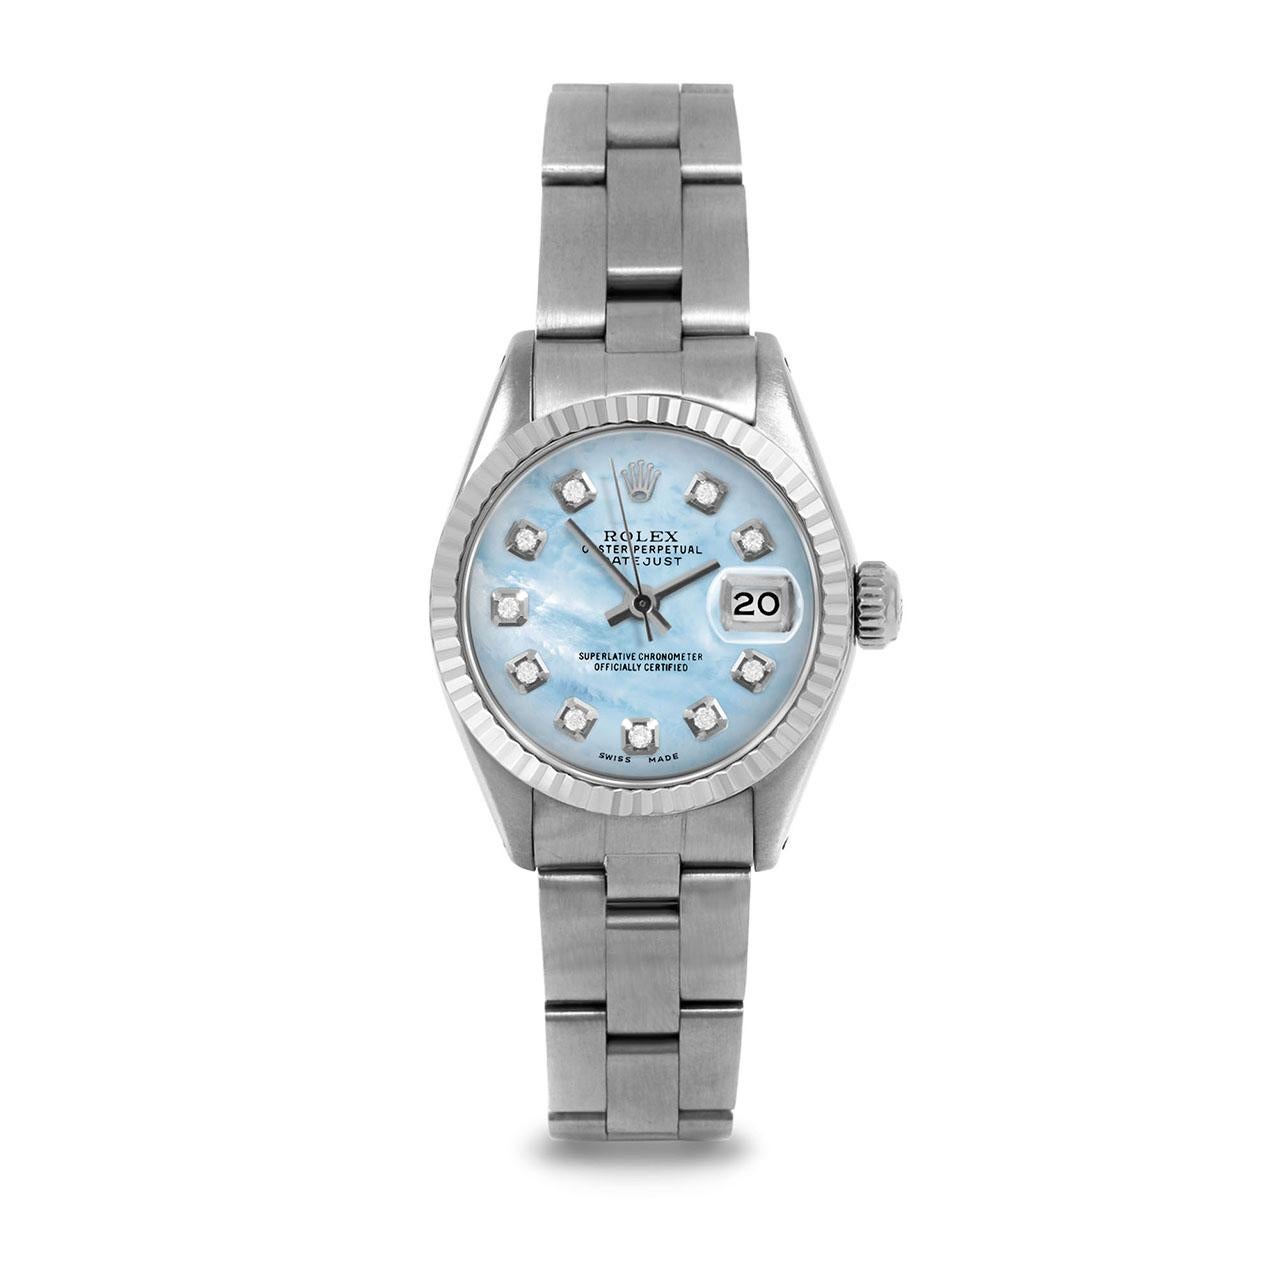 Pre-Owned Rolex 6917 Ladies 26mm Datejust Watch, Custom Light Blue Mother of Pearl Diamond Dial & Fluted Bezel on Rolex Stainless Steel Oyster Band.   

SKU 6917-SS-LBMOP-DIA-AM-FLT-OYS


Brand/Model:        Rolex Datejust
Model Number:       